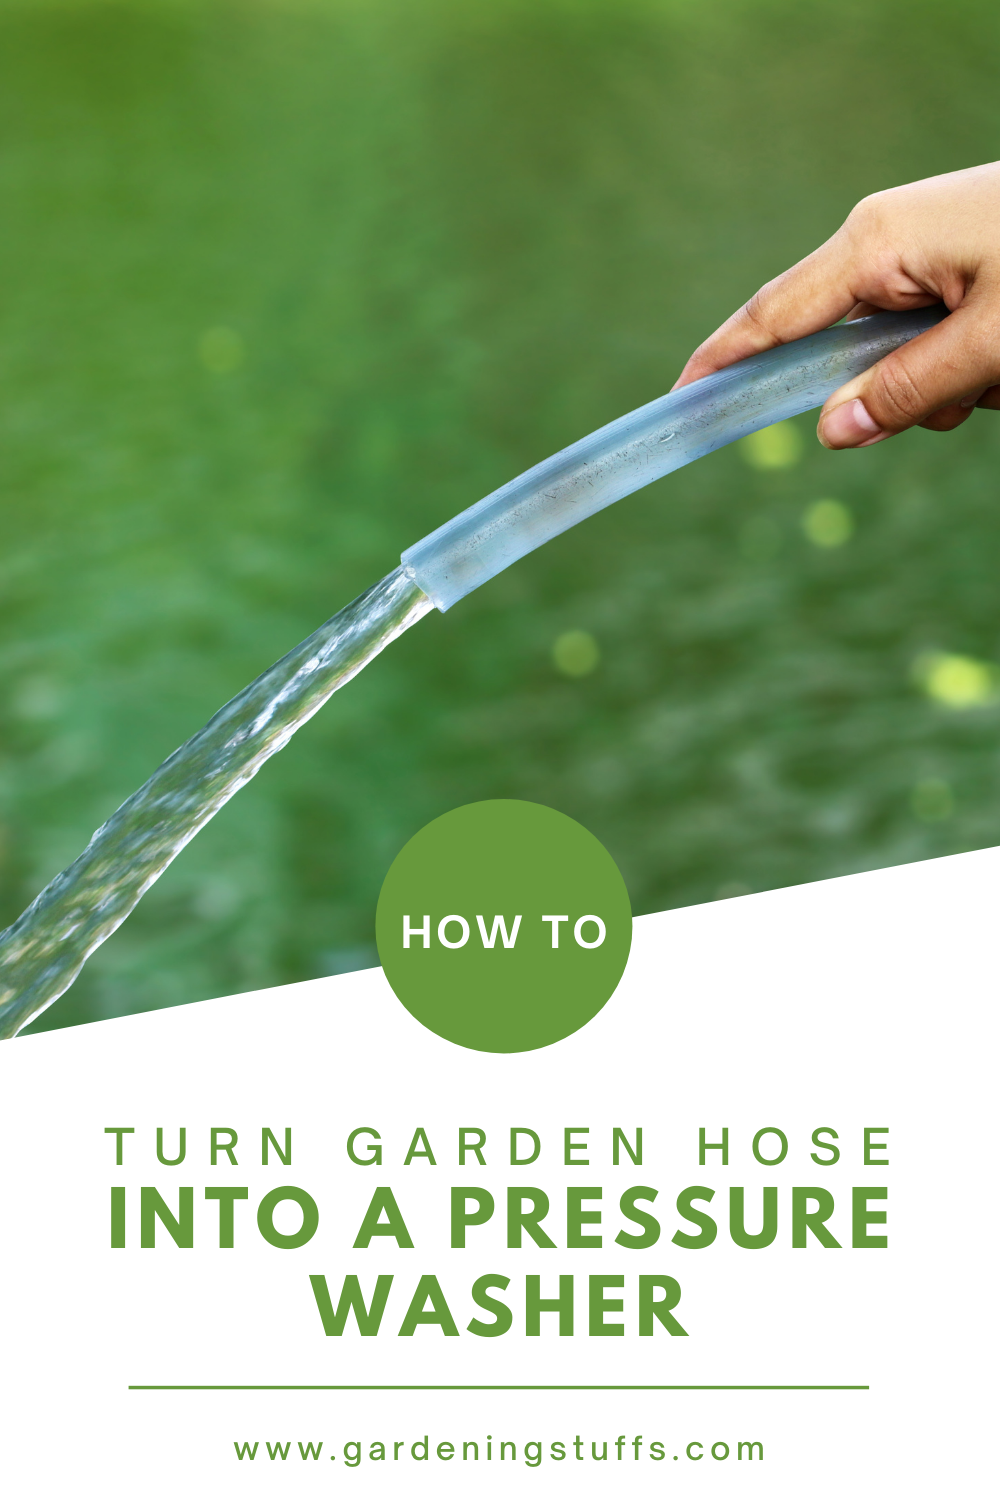 Do you know that you can convert your ordinary garden hose into a pressure washer? In this article, we have listed the steps that you need to follow to convert your garden hose into a pressure washer.